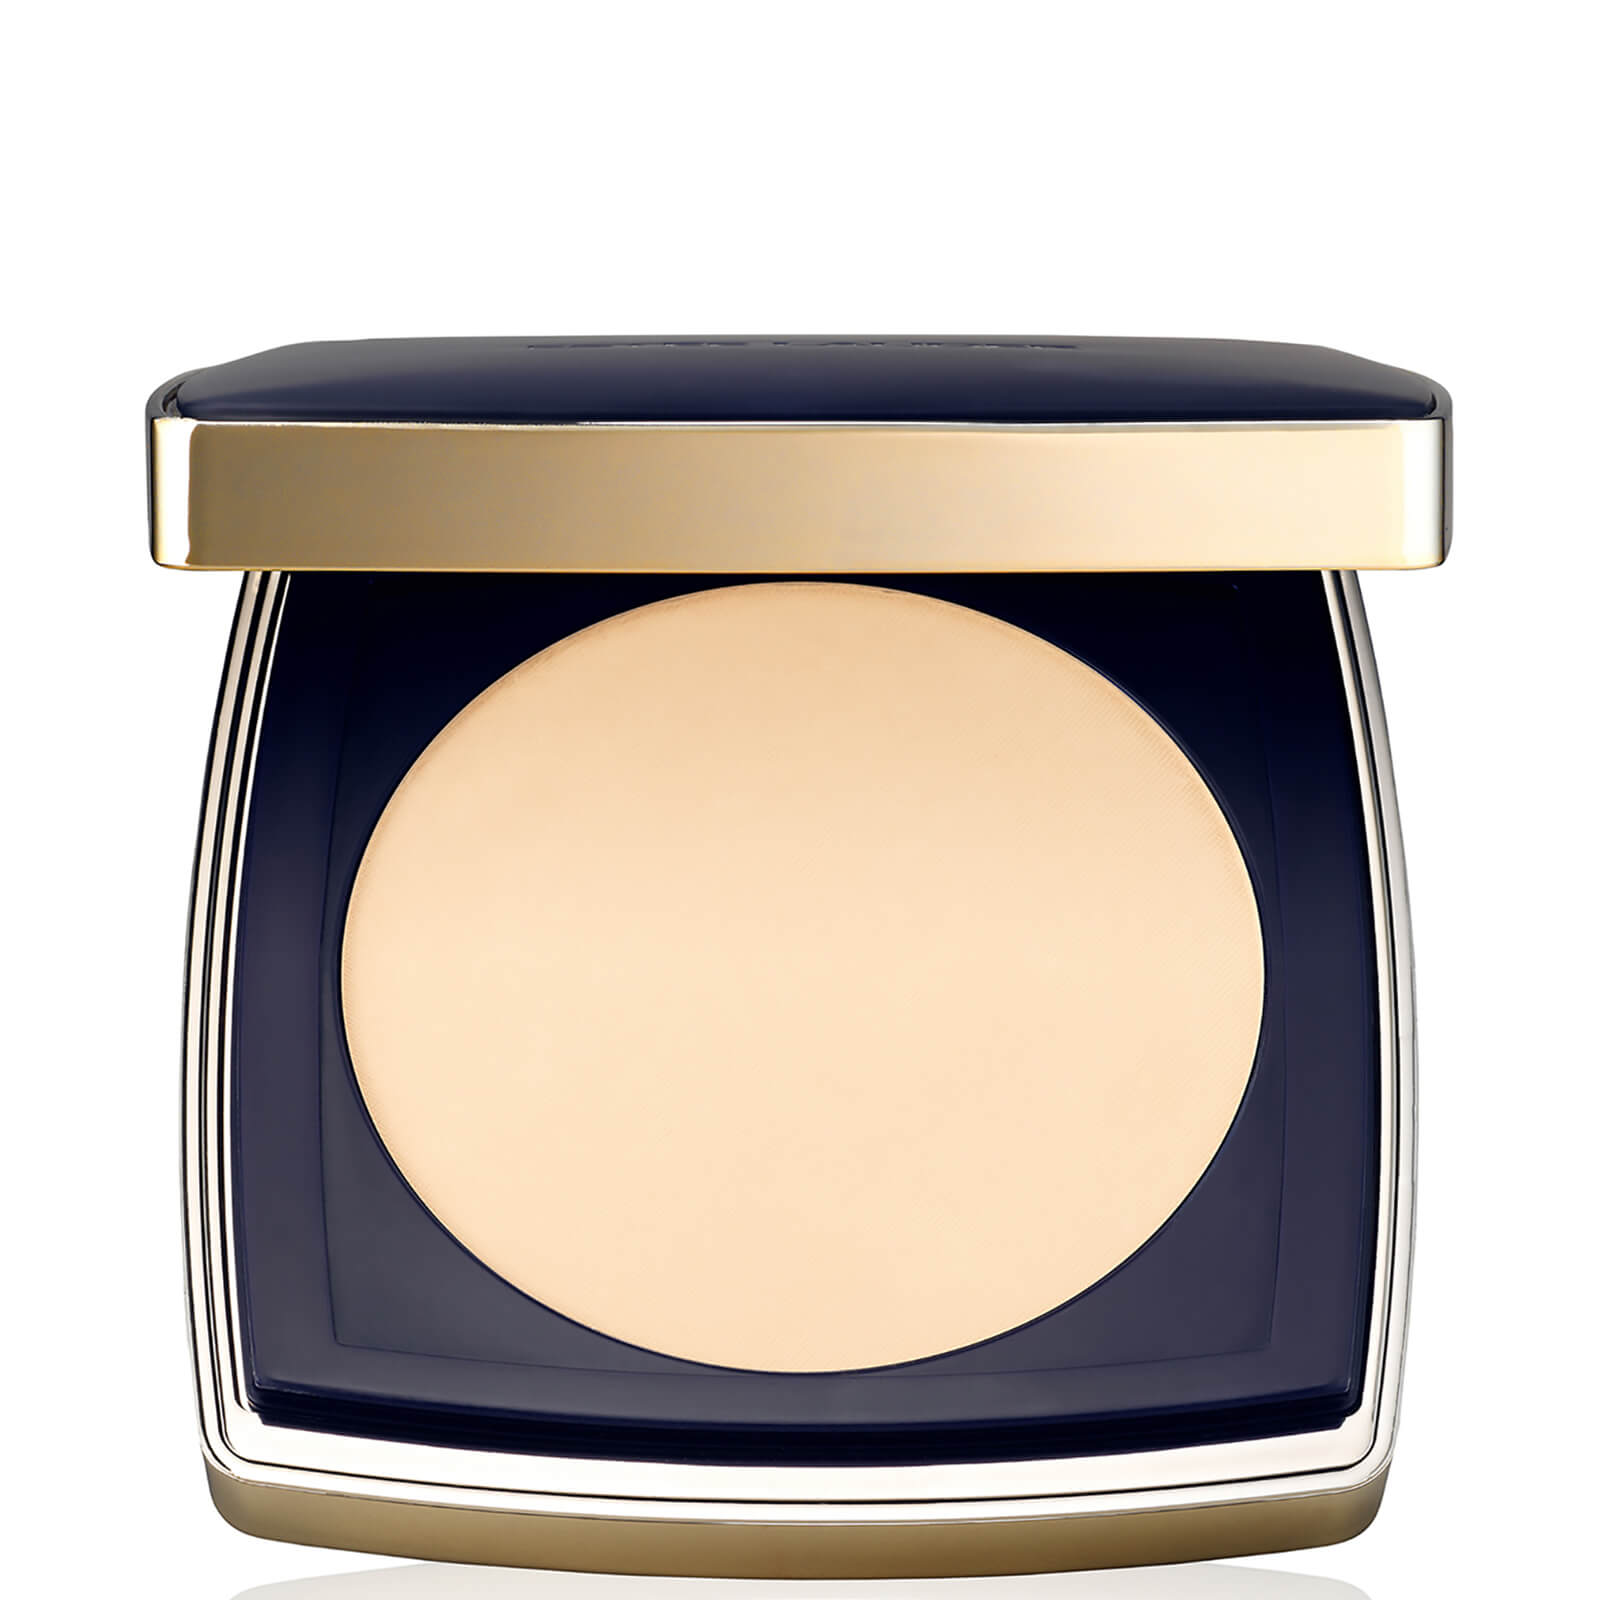 Estée Lauder Double Wear Stay-in-place Matte Powder Foundation Spf10 12g (various Shades) - 1n1 Ivory Nude